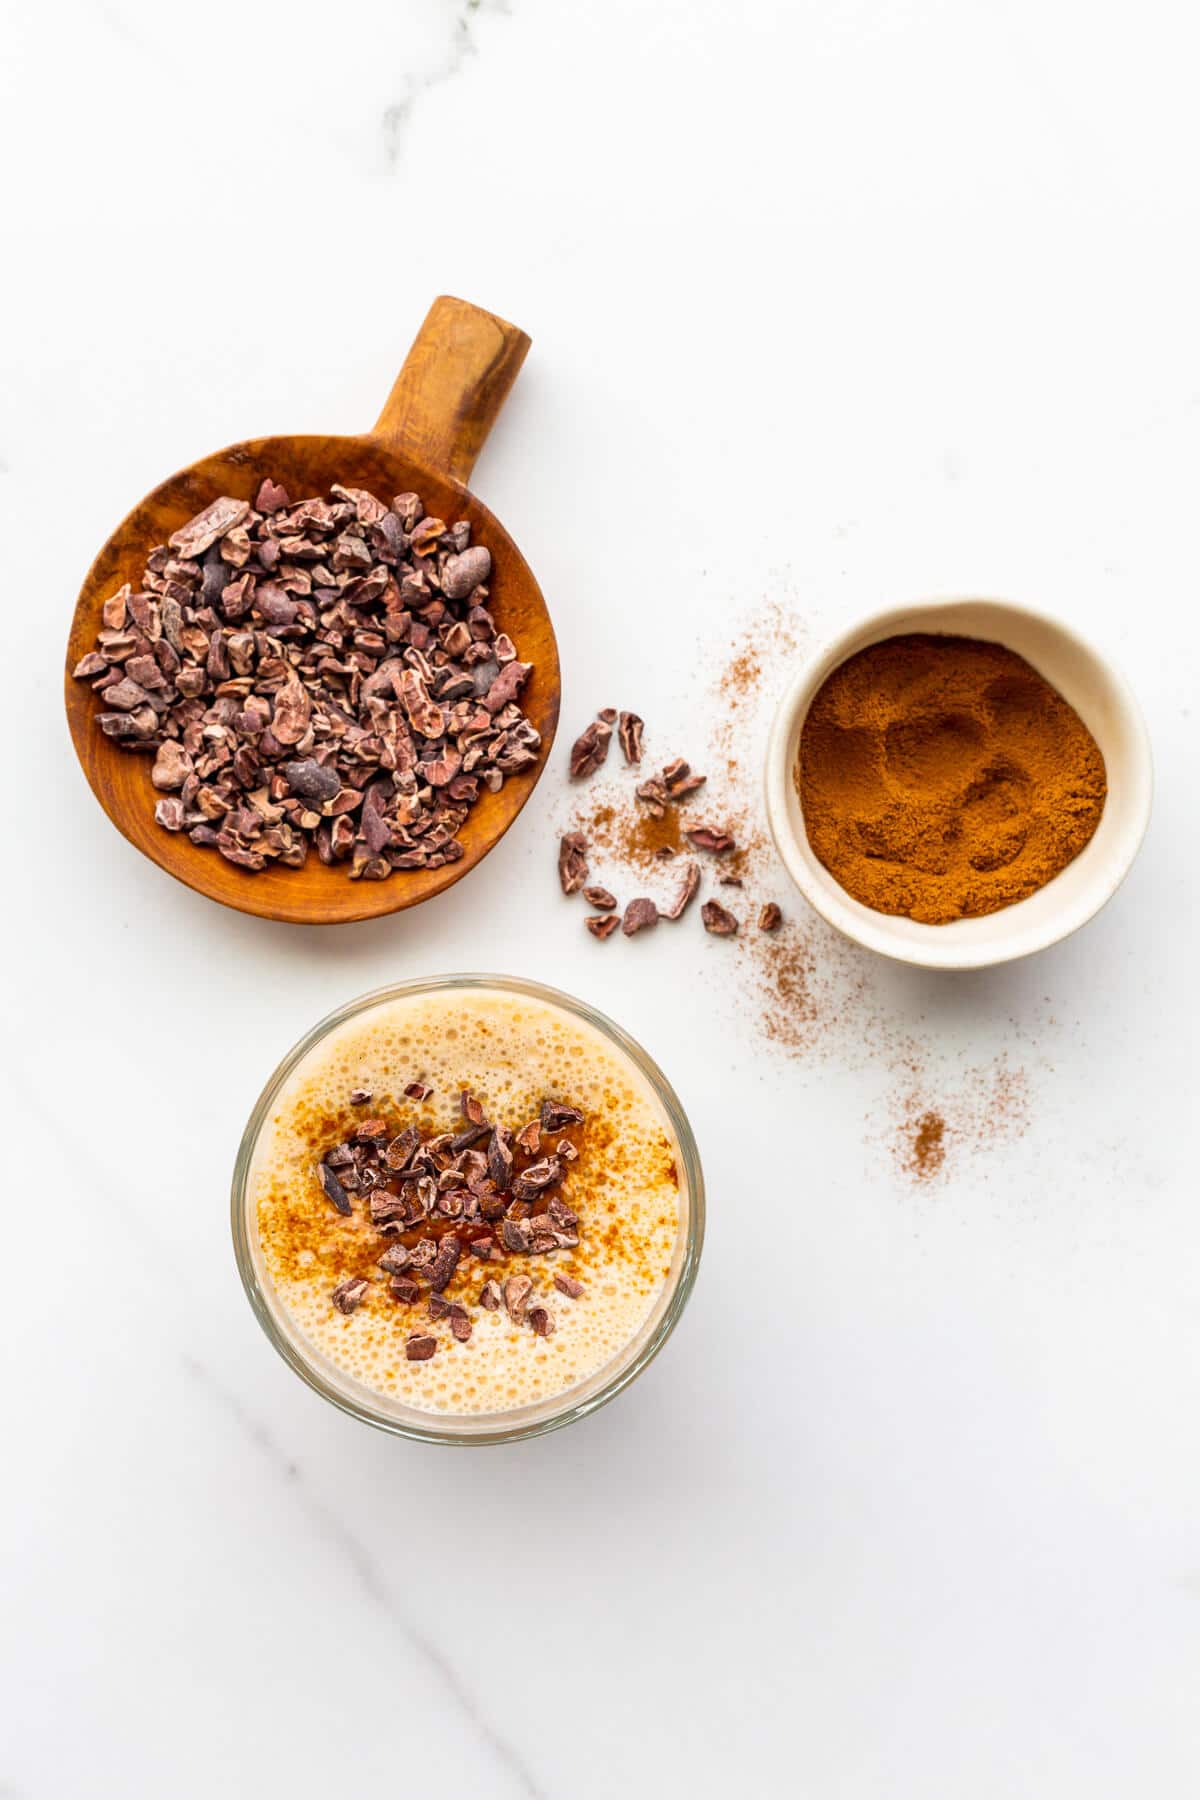 Garnishing banana smoothies with cocoa nibs and espresso powder to serve them.